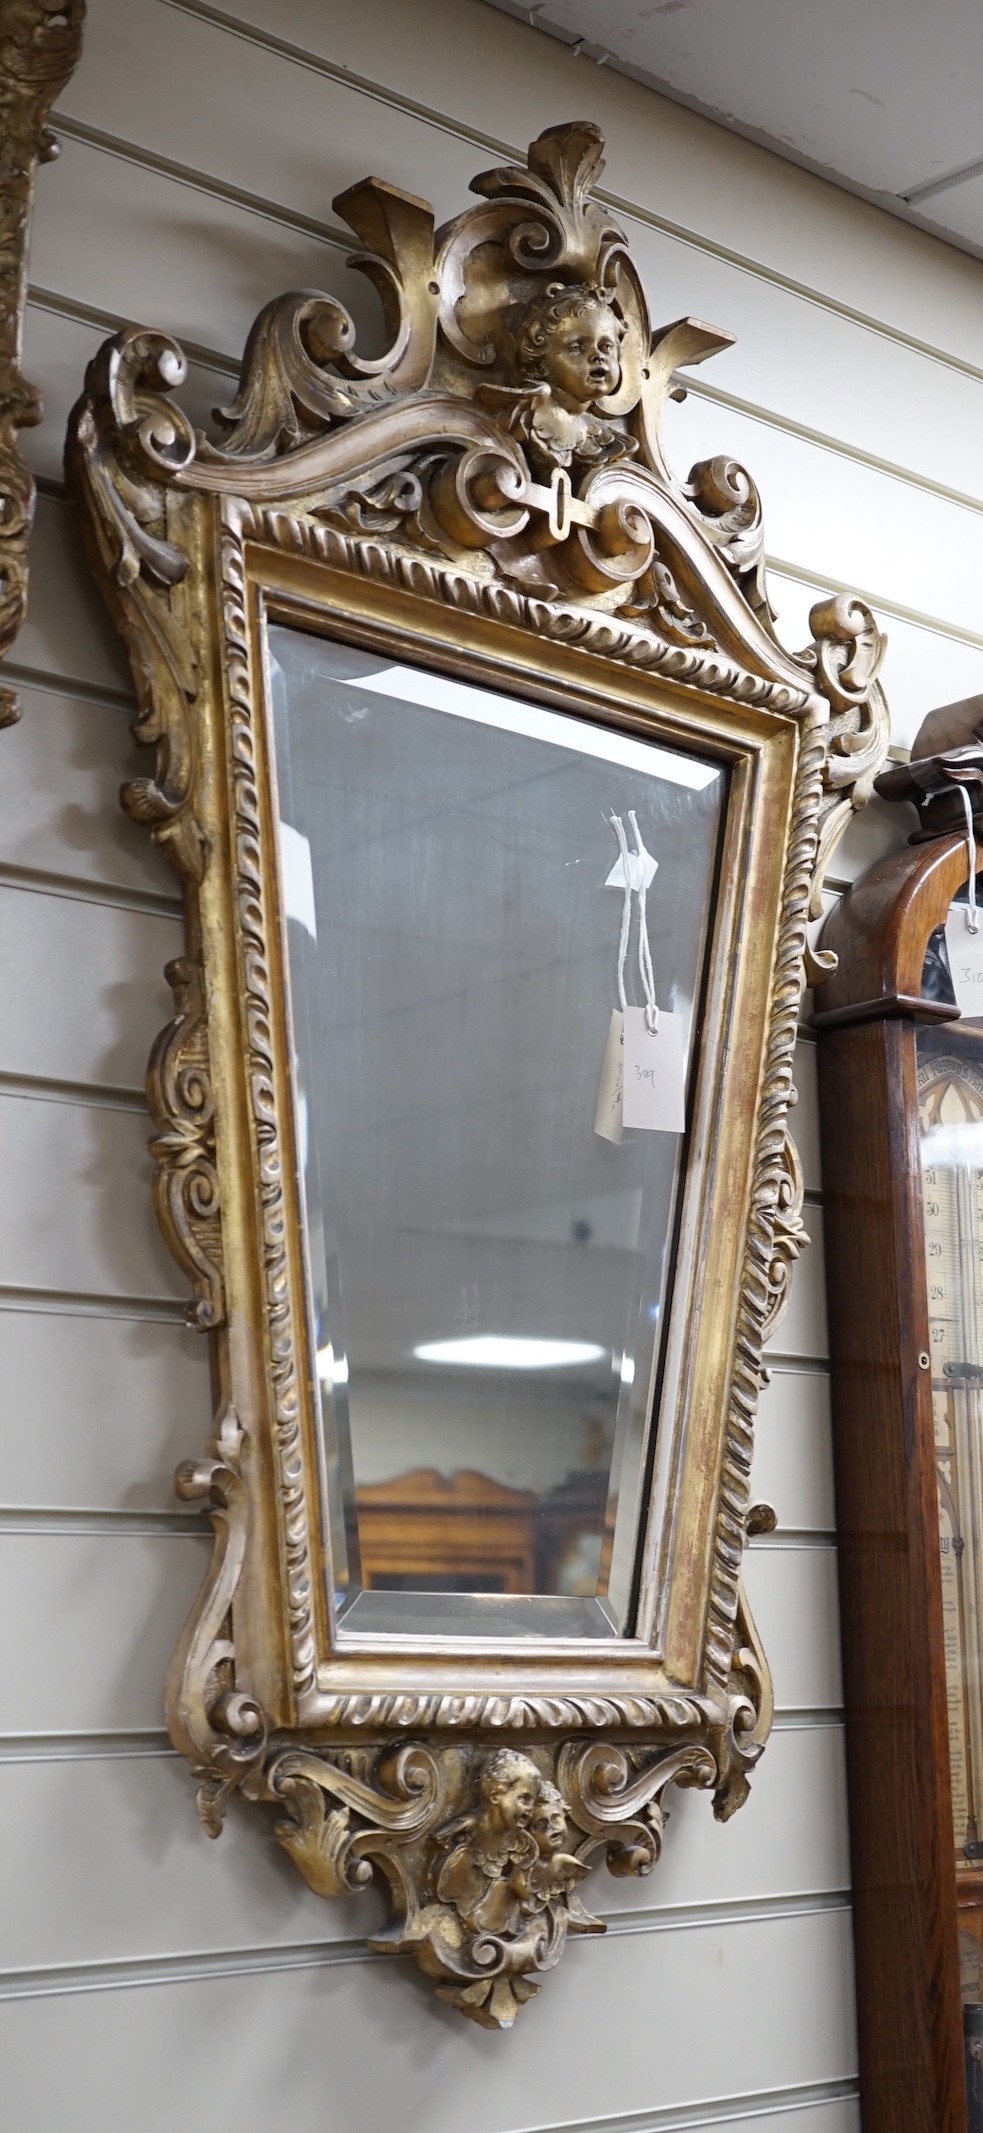 A late 19th century Continental giltwood cartouche shaped wall mirror, width 54cm, height 100cm *Please note the sale commences at 9am.